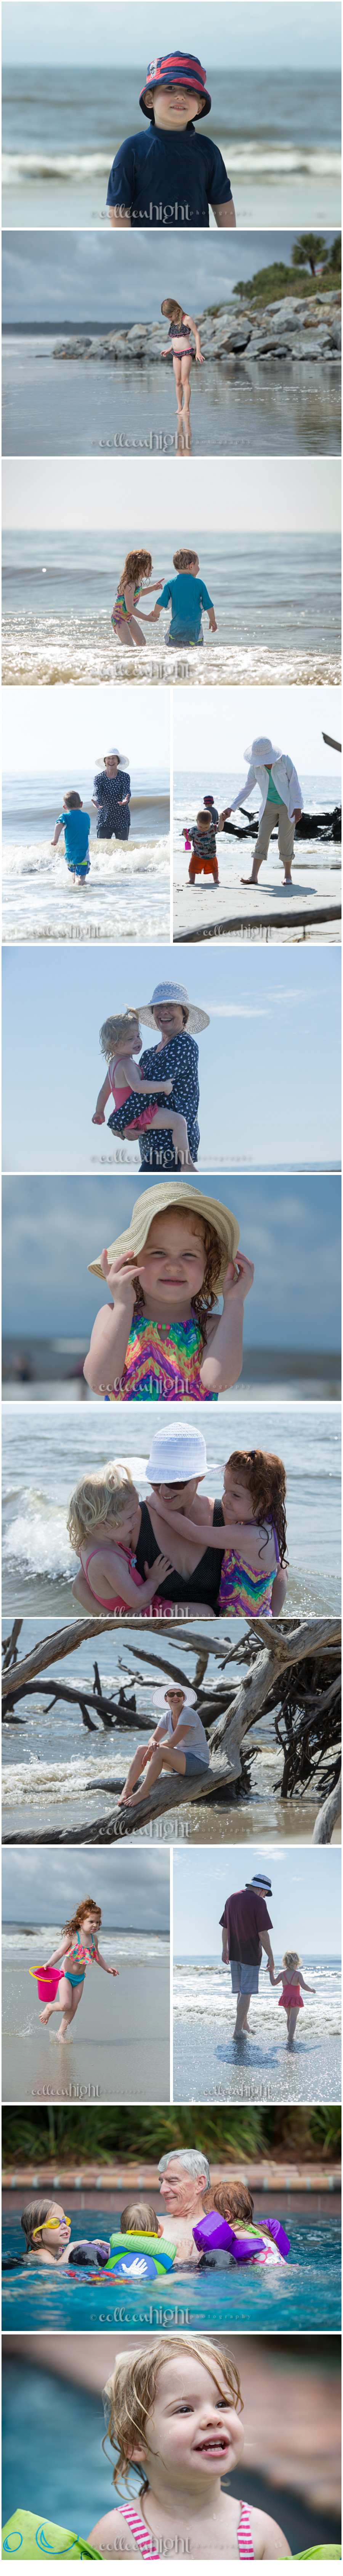 Summer Story on St Simons Island with Colleen Hight Photography